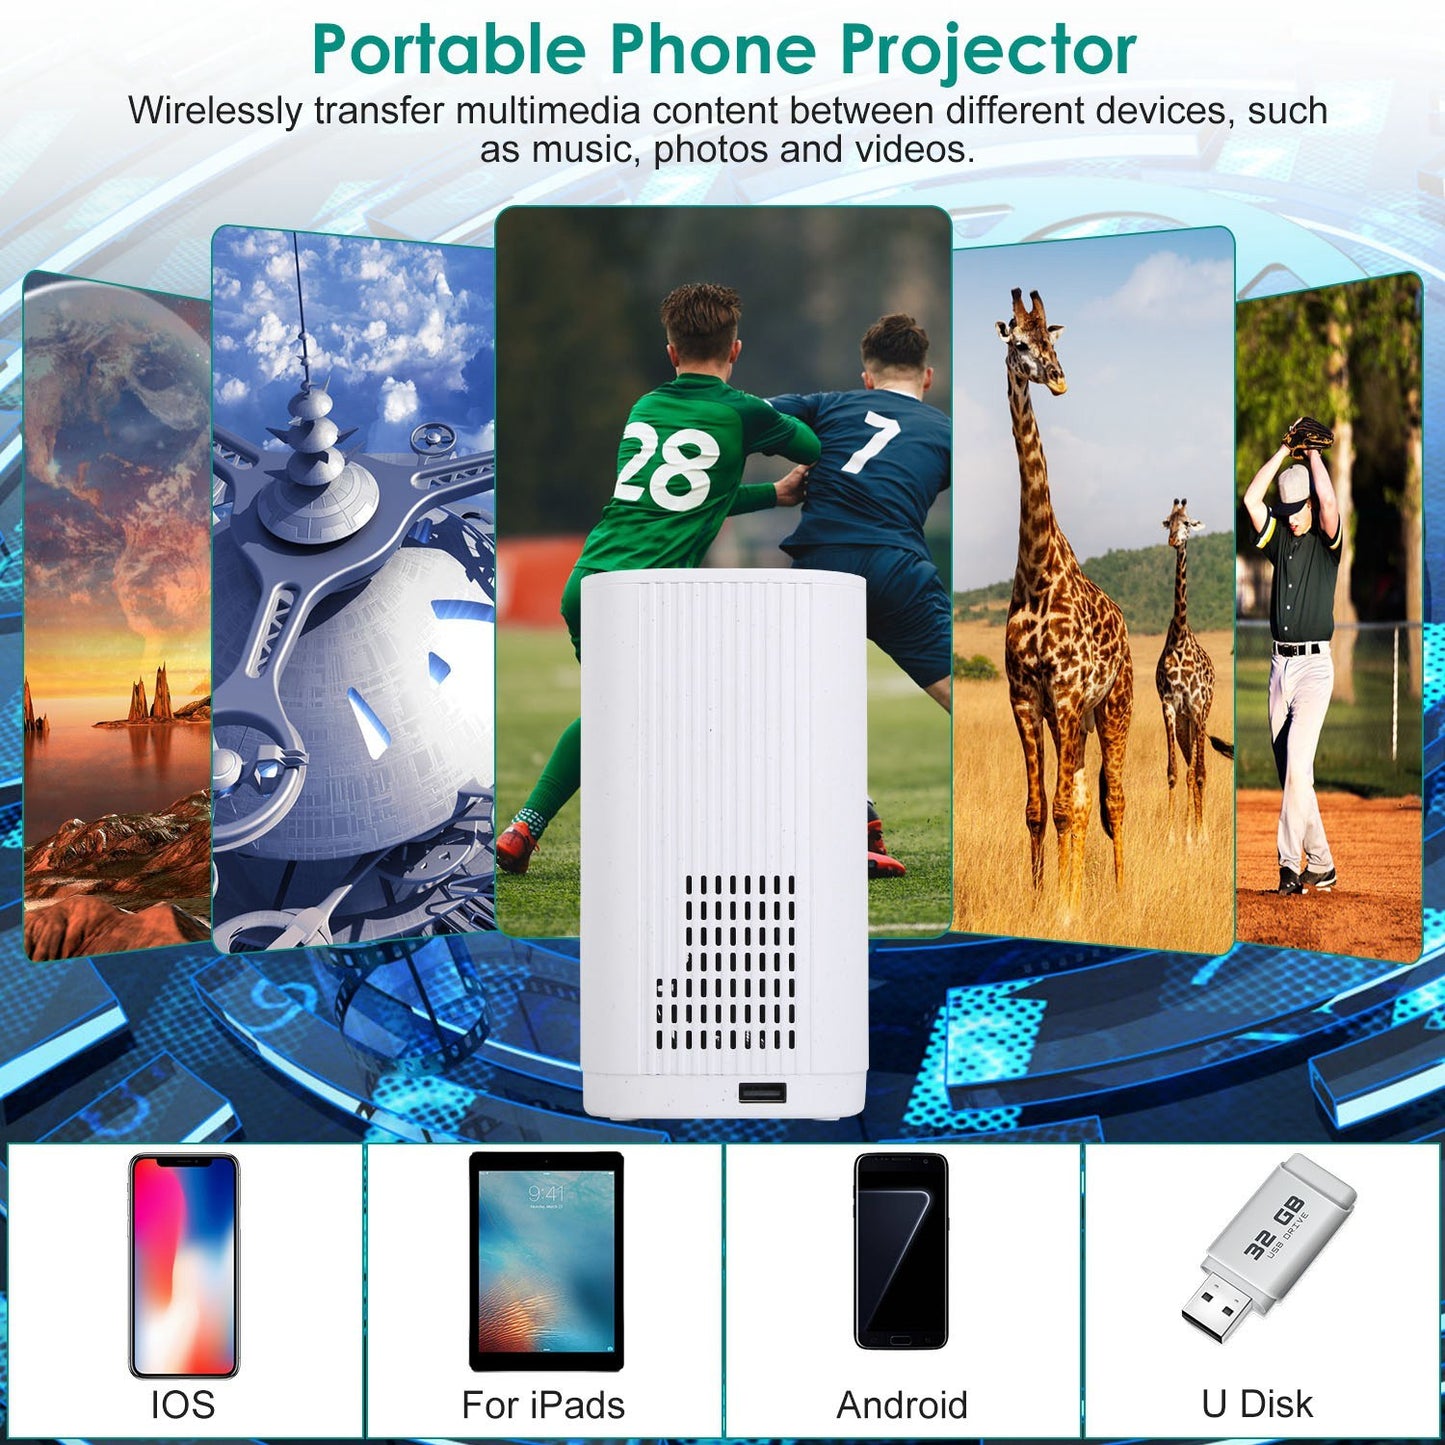 WiFi Mini Projector Portable 1080P Projector Phone Projector Home Movie Projector Compatible with IOS Android iPads U Disk